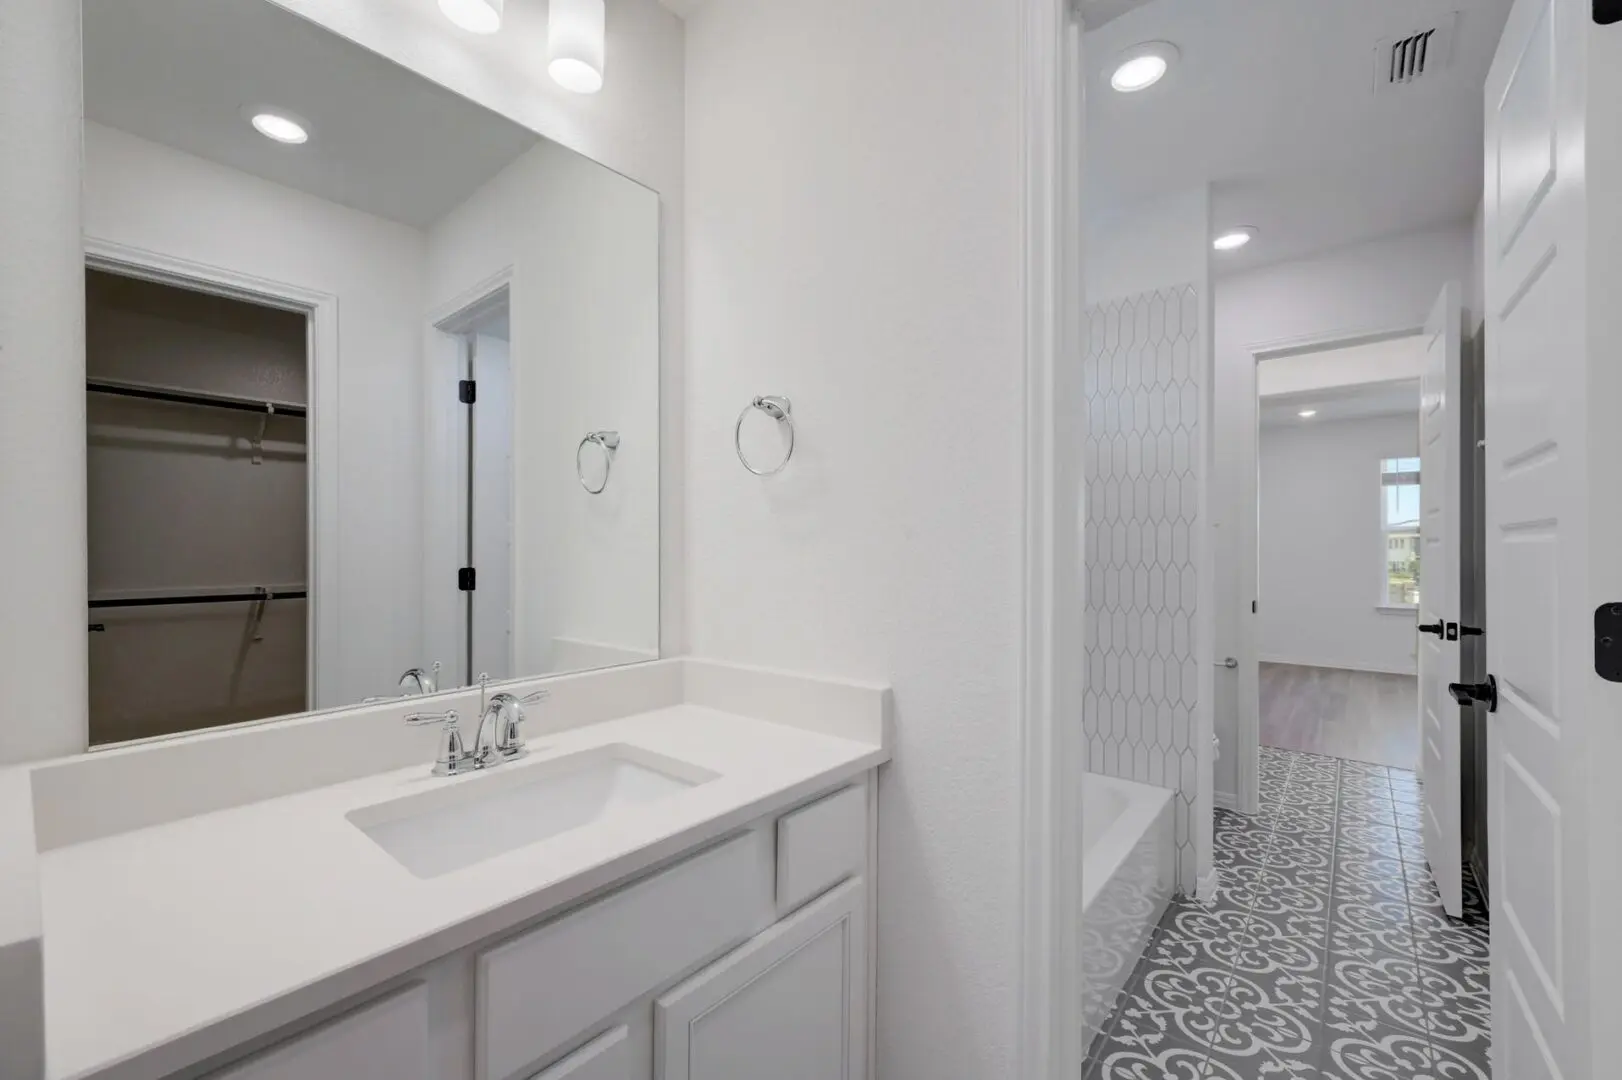 A white bathroom with a sink and mirror.